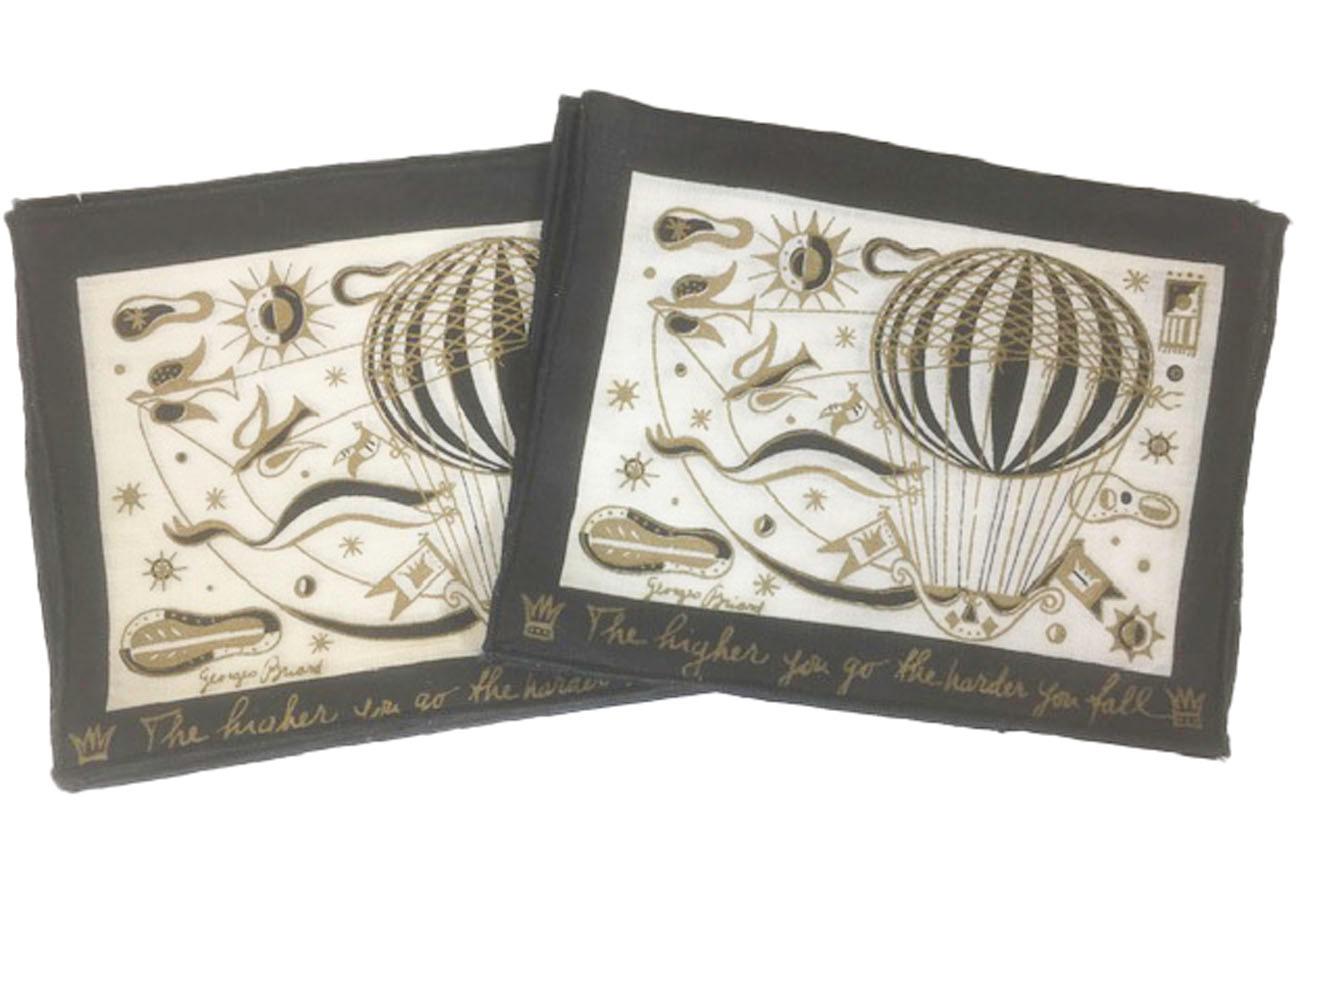 Boxed et of 8 vintage Georges Briard linen cocktail napkins printed in black with gold and having a hot air balloon motif inside a black border. The bottom border with the words 